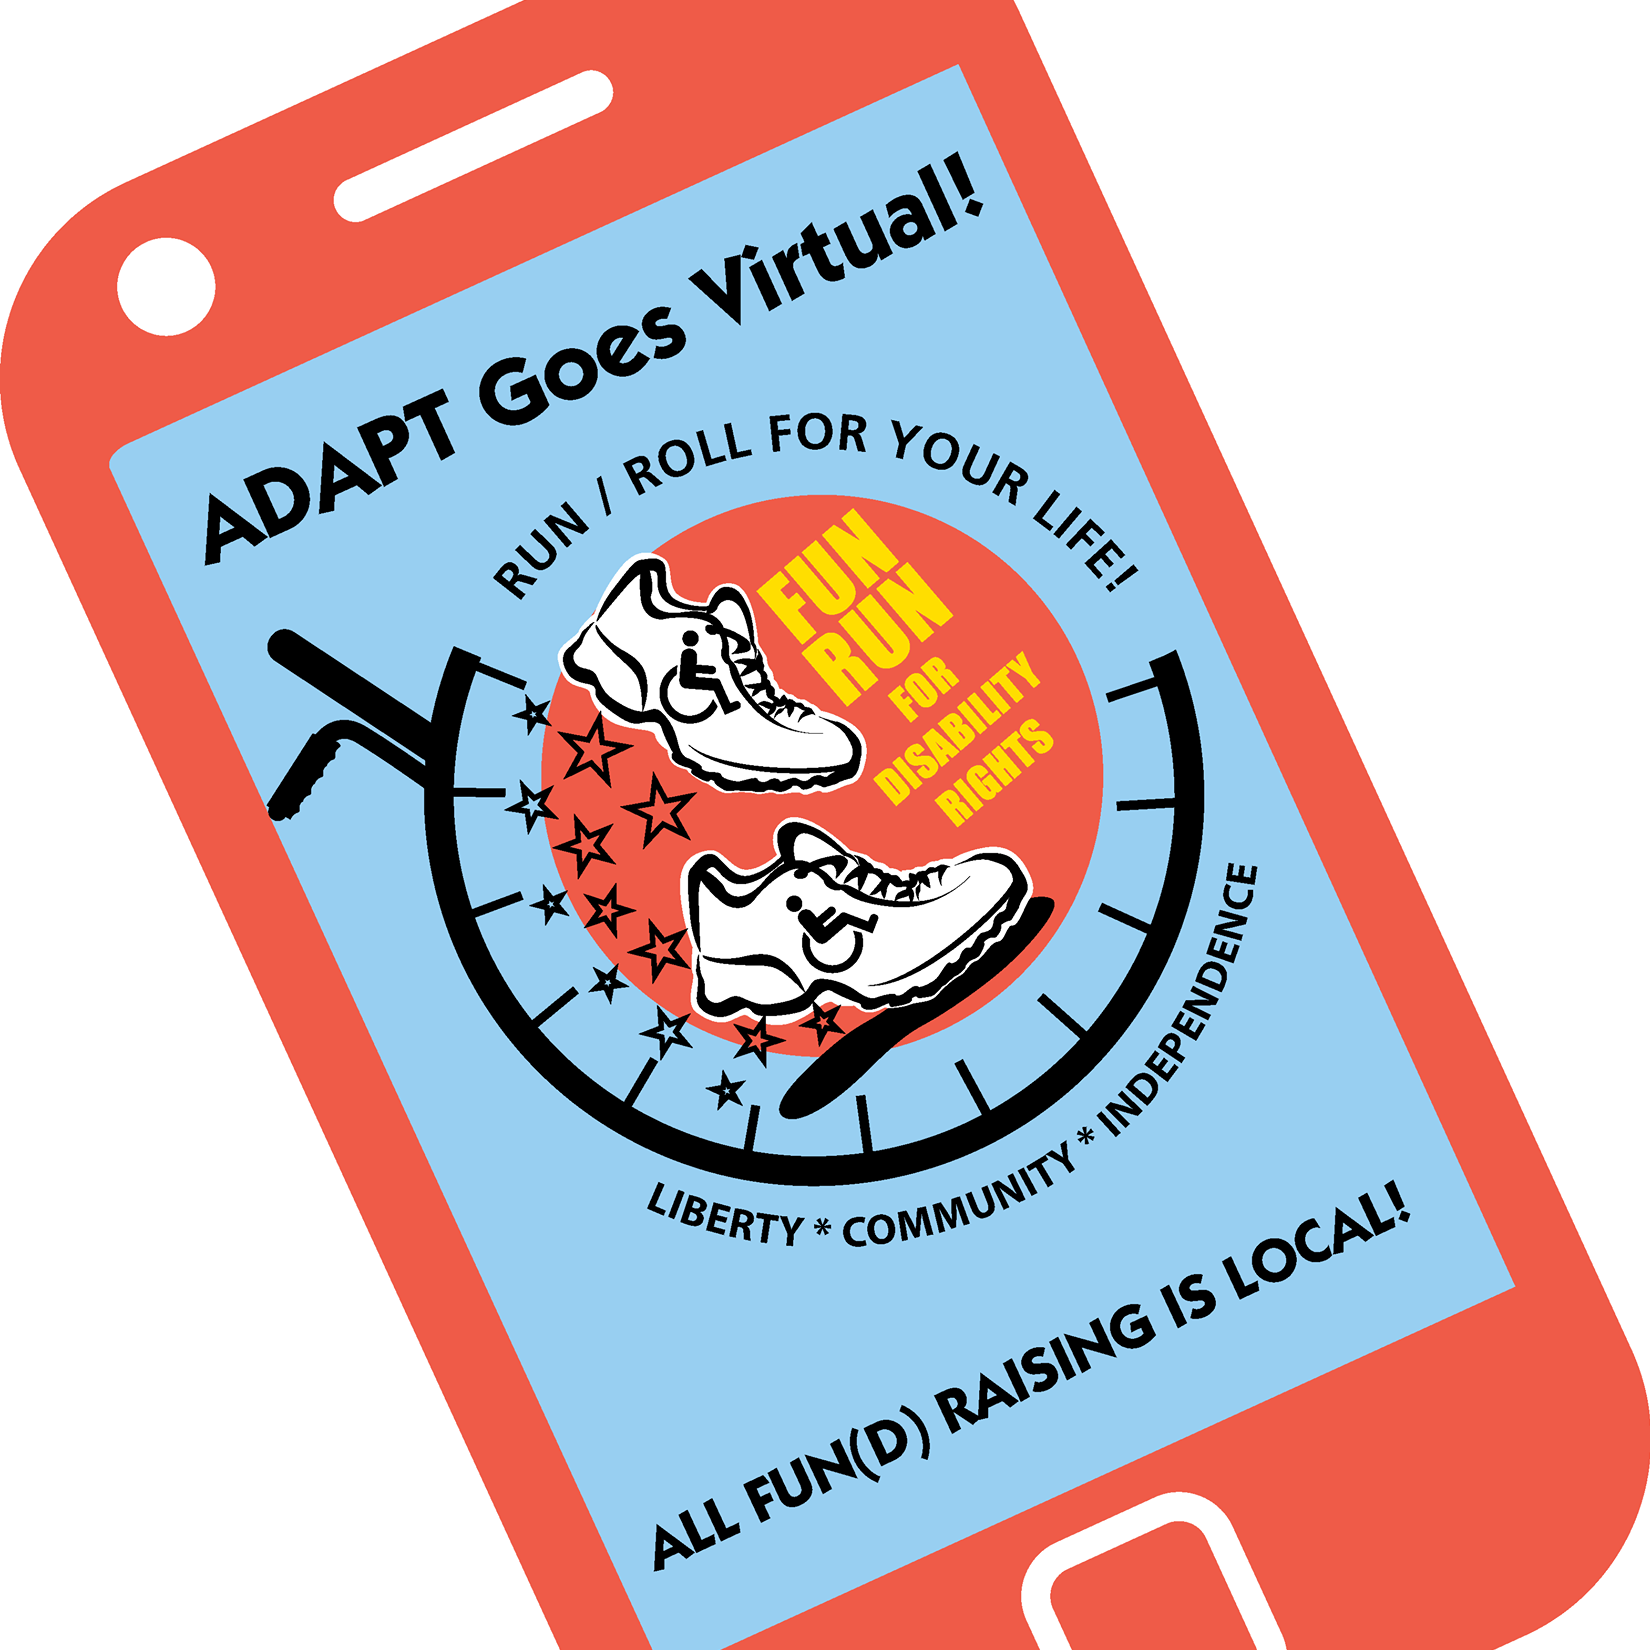 ADAPT Goes Virtual! Run/ Roll for your Life! Liberty, Community, Independence. FUN RUN for disability rights. All fun(d)raising is local!